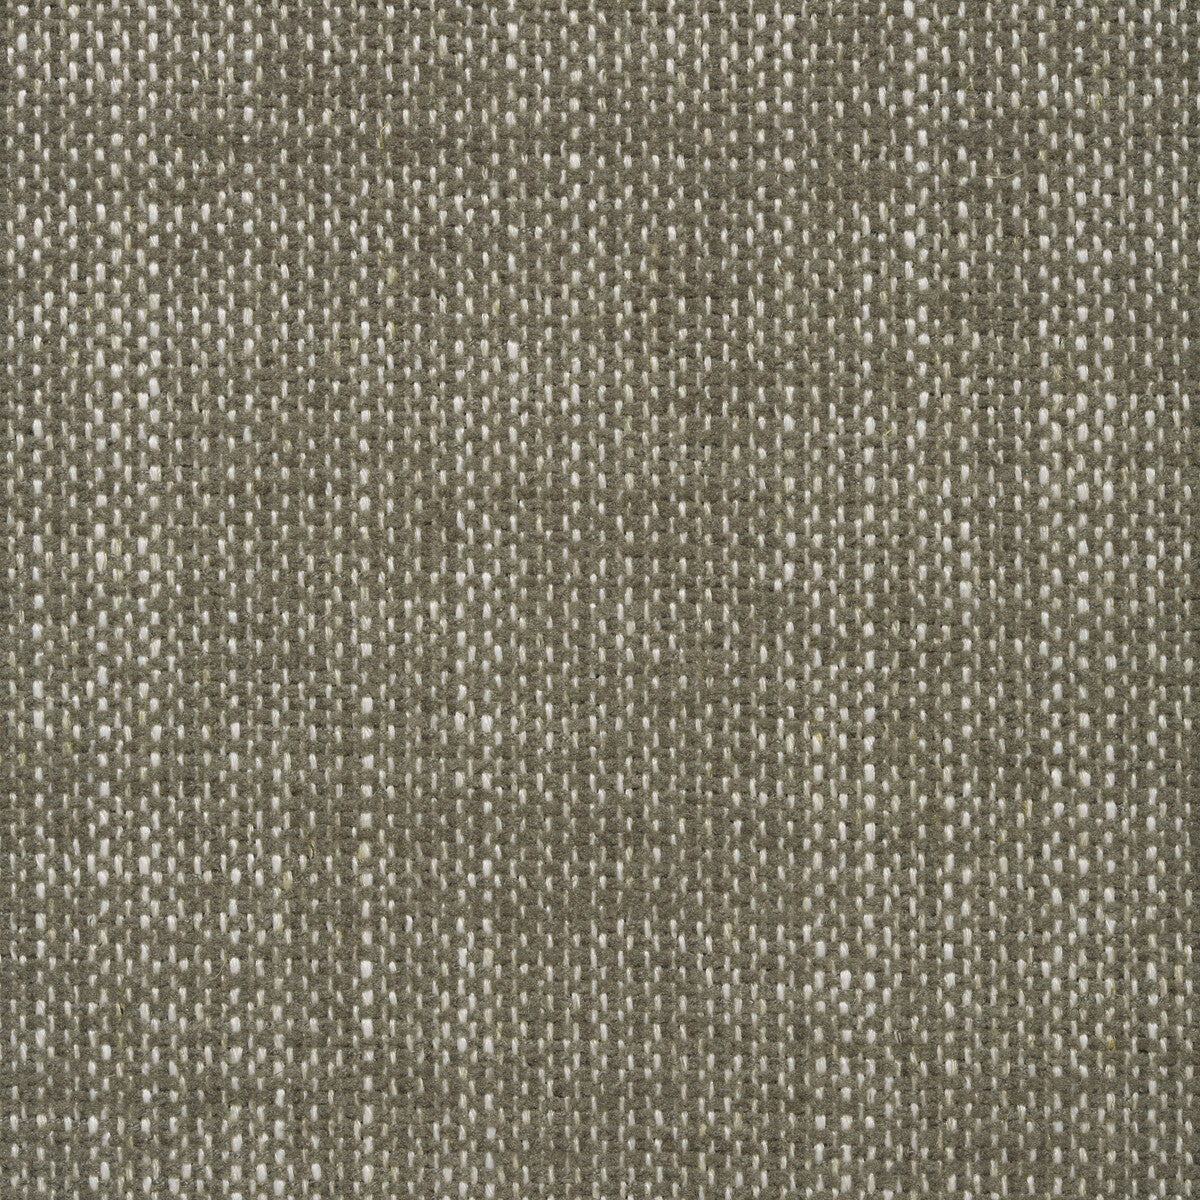 Kravet Contract fabric in 35112-106 color - pattern 35112.106.0 - by Kravet Contract in the Crypton Incase collection